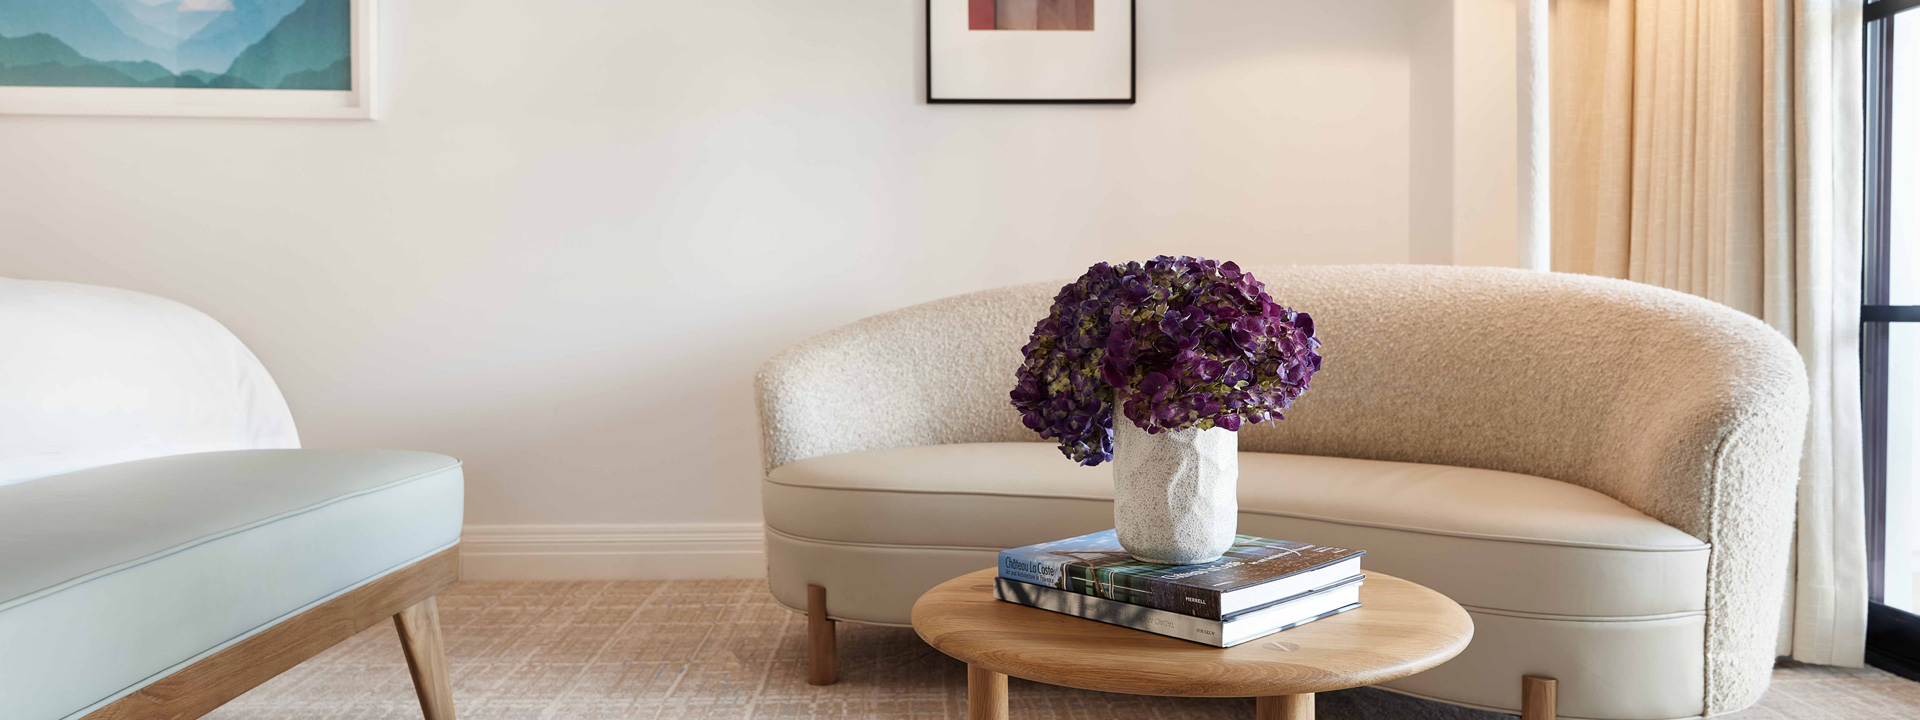 A white bean shaped couch and a light blue bench in the living area of a hotel room. A vase of purple flowers sites on a small wooden table.